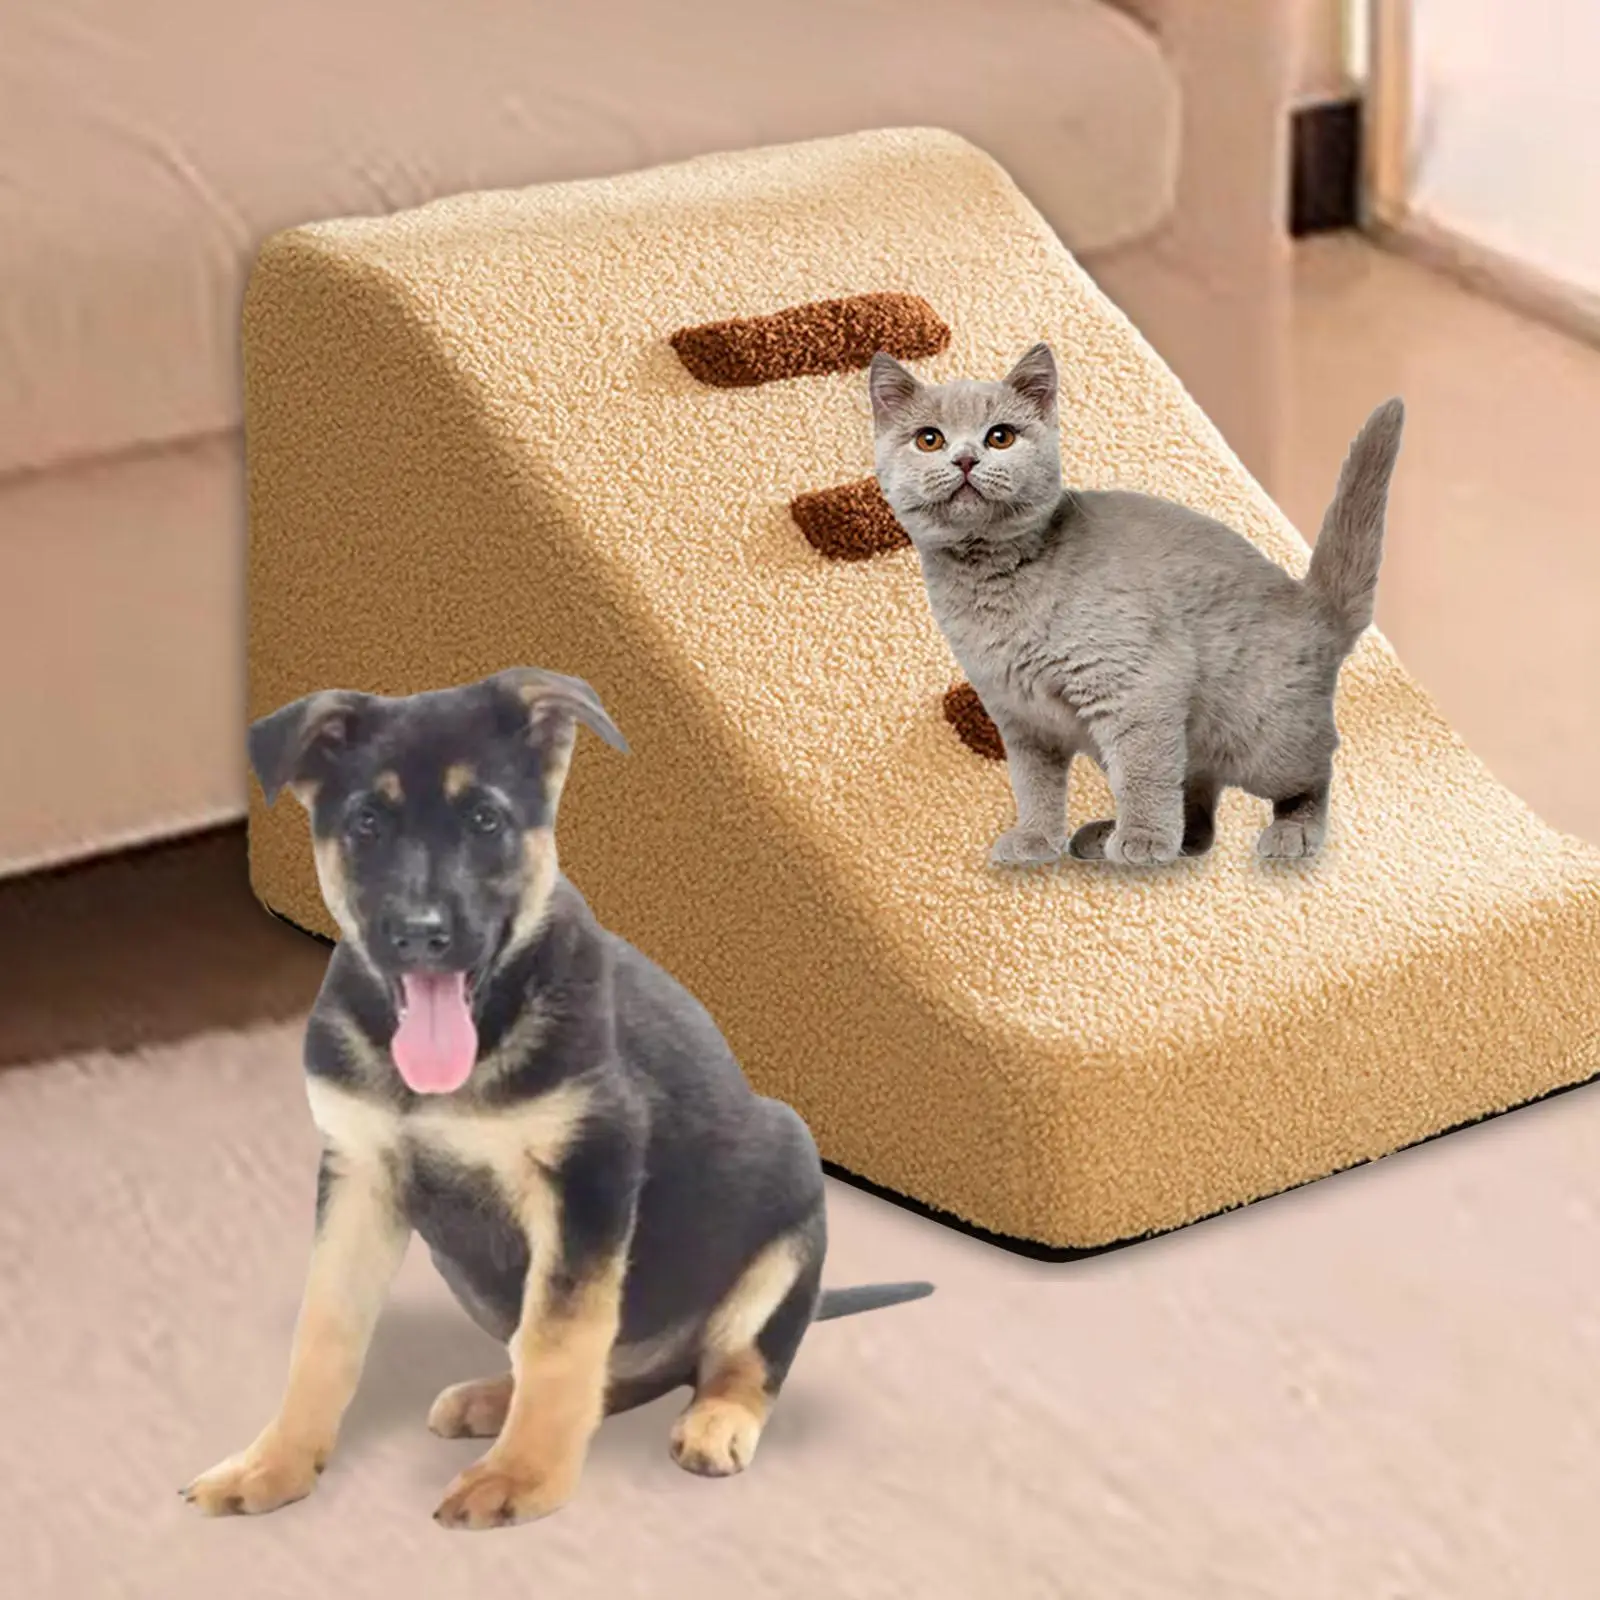 Dog Stairs Indoor Outdoor Use Sturdy Machine Washable Cover Stable Comfortable High Density Sponge Dog Ladder Lightweight